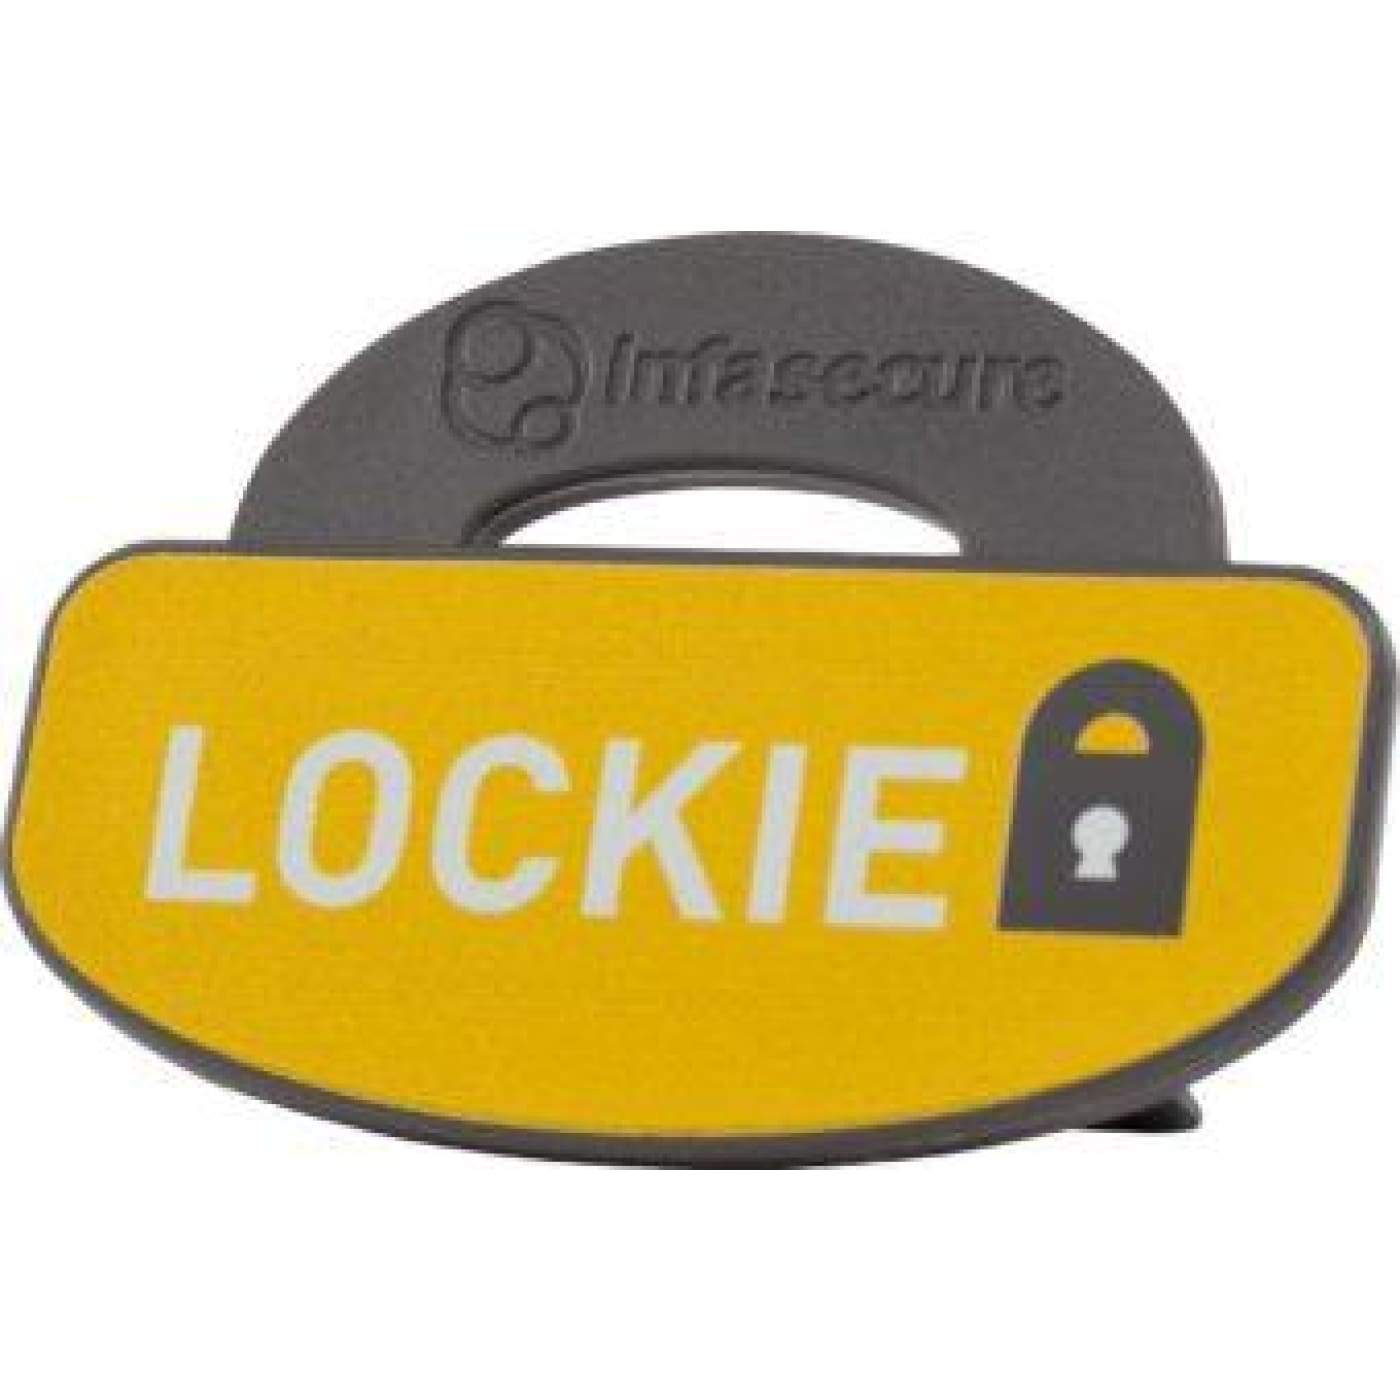 InfaSecure Lockie Hang Sell - CAR SEATS - ACCESSORIES FOR FITTING